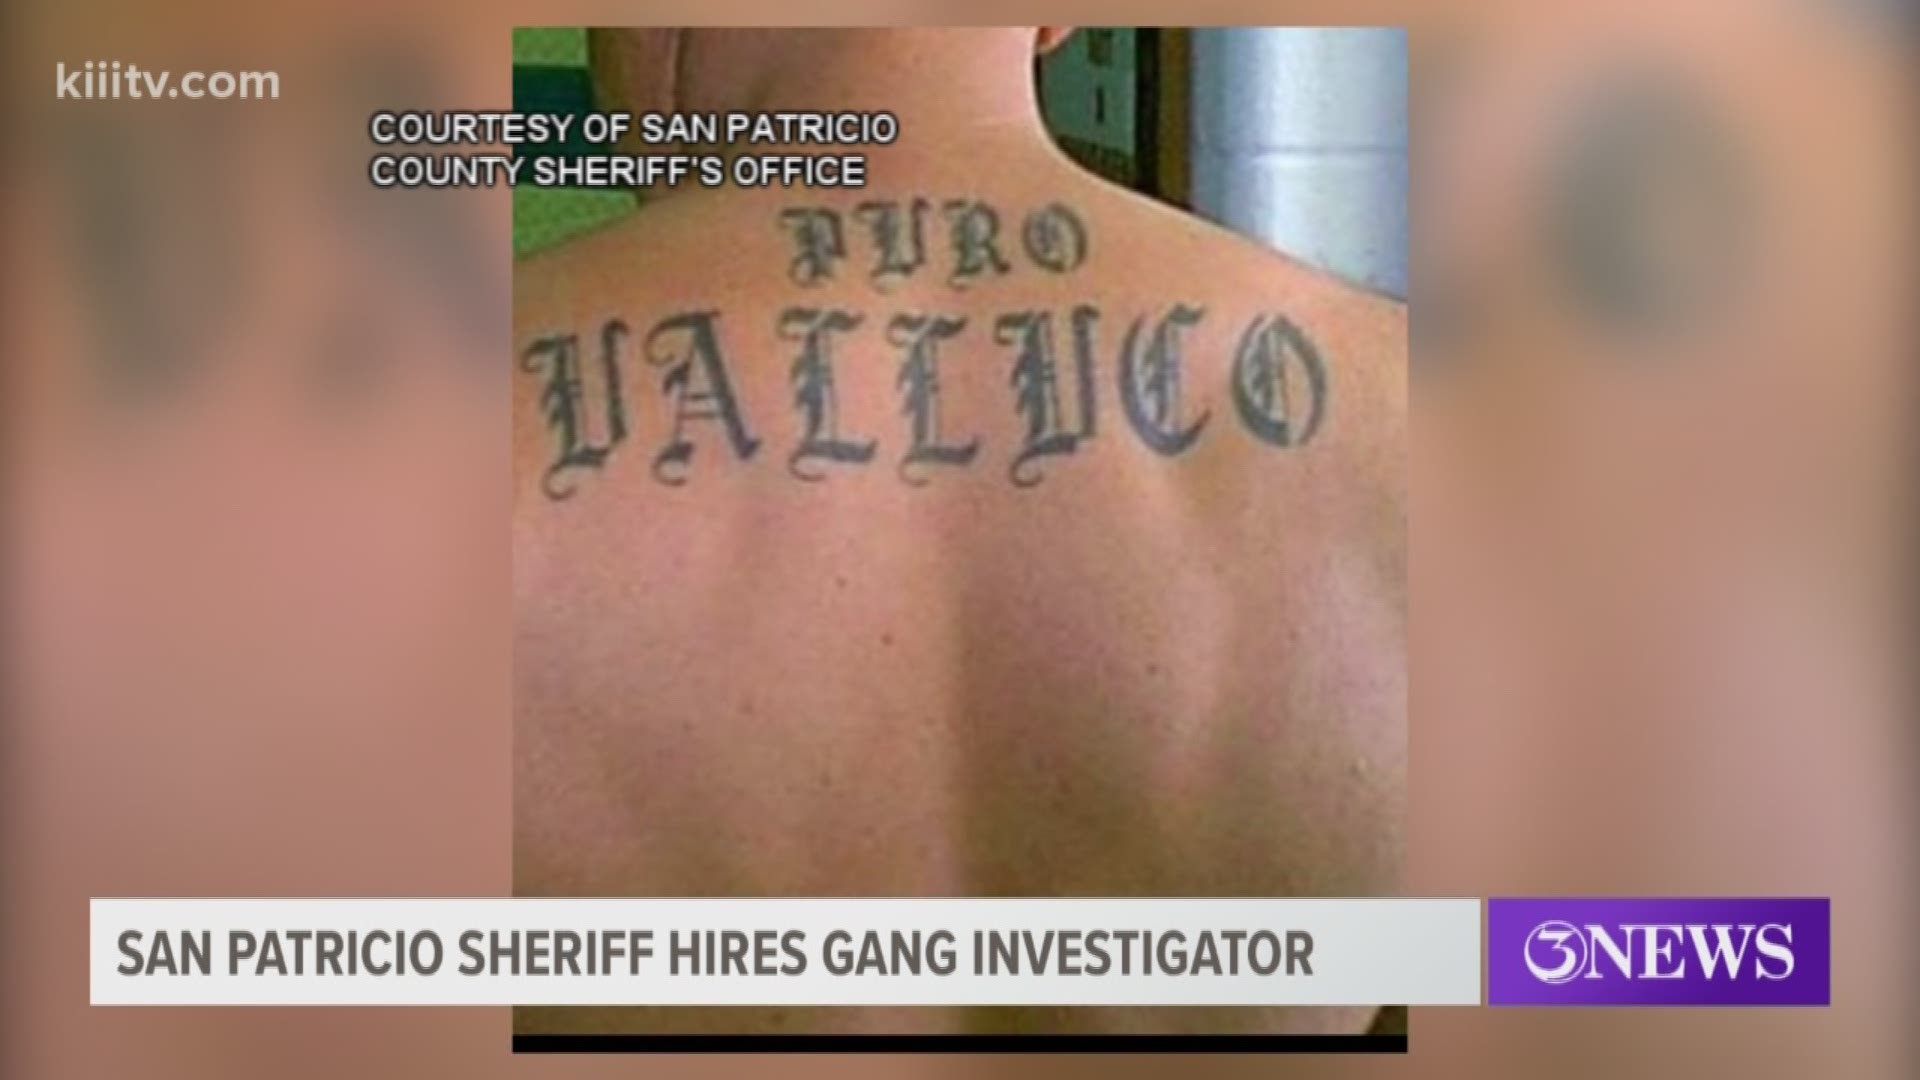 Sheriff Oscar Rivera said they recently hired a gang investigator as a part of their criminal investigations team.